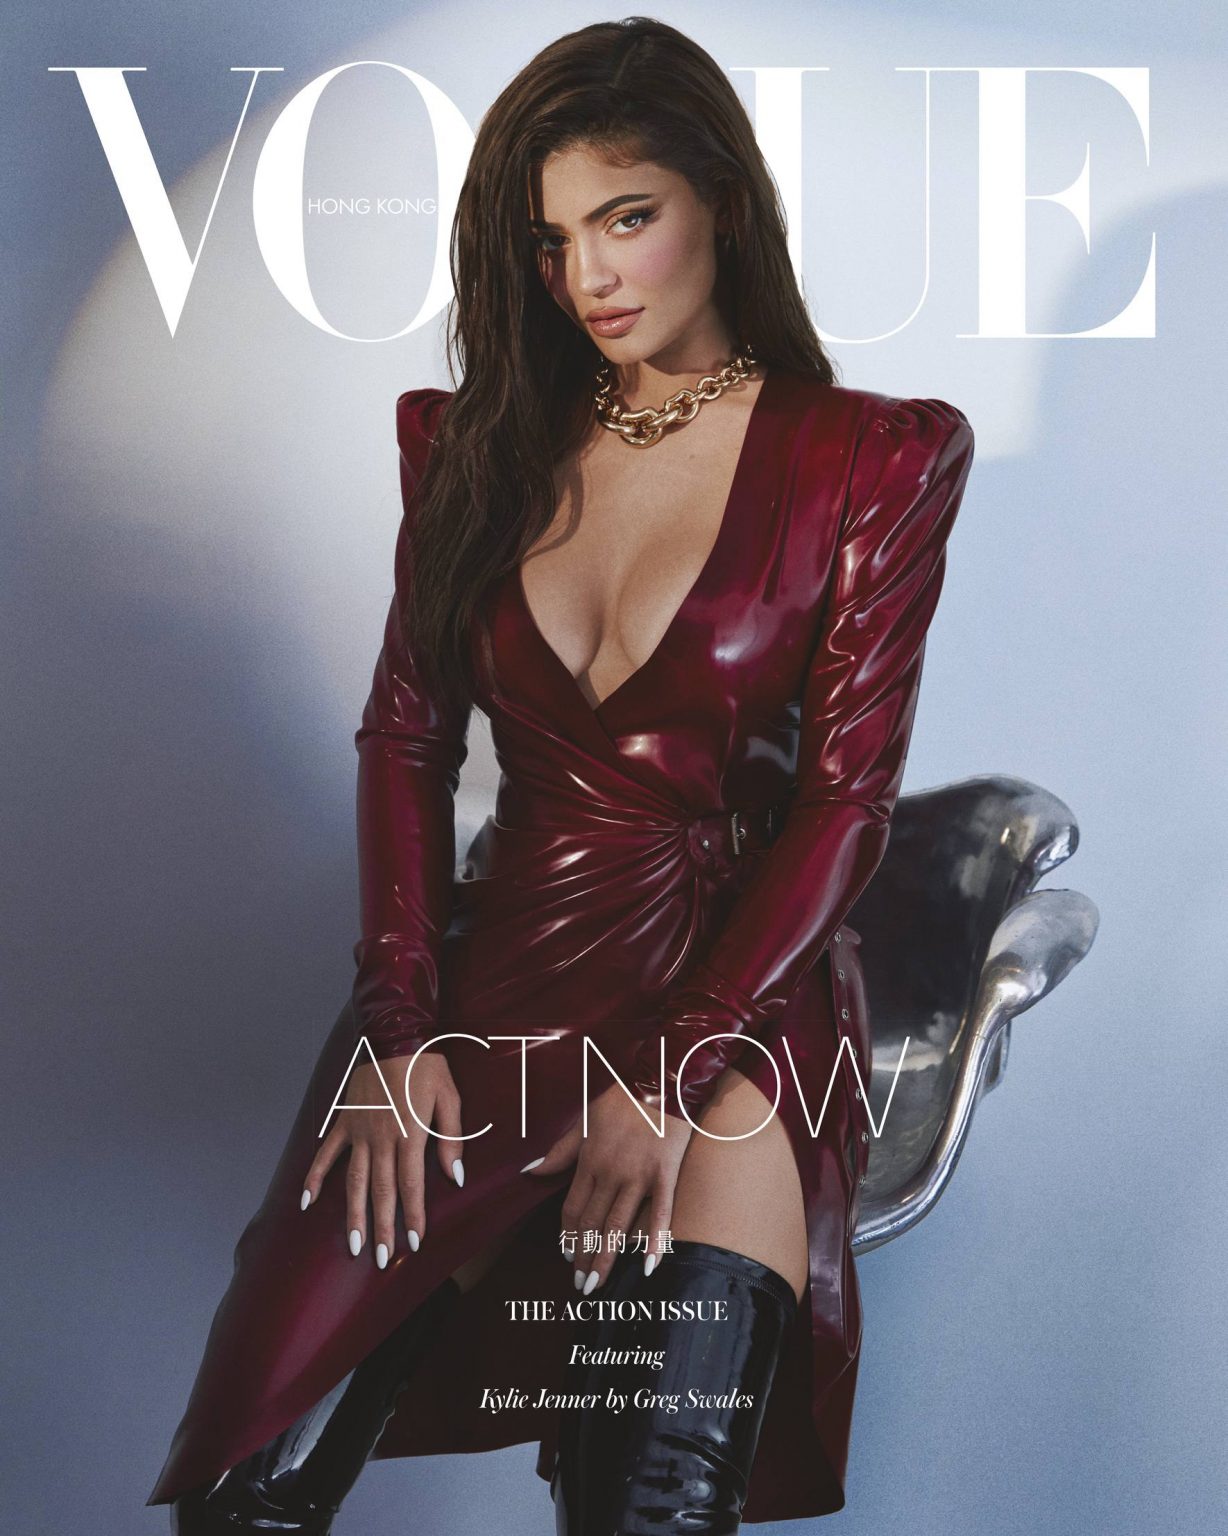 Kylie Jenner Airbrushed to Oblivion for Vogue! - Photo 5